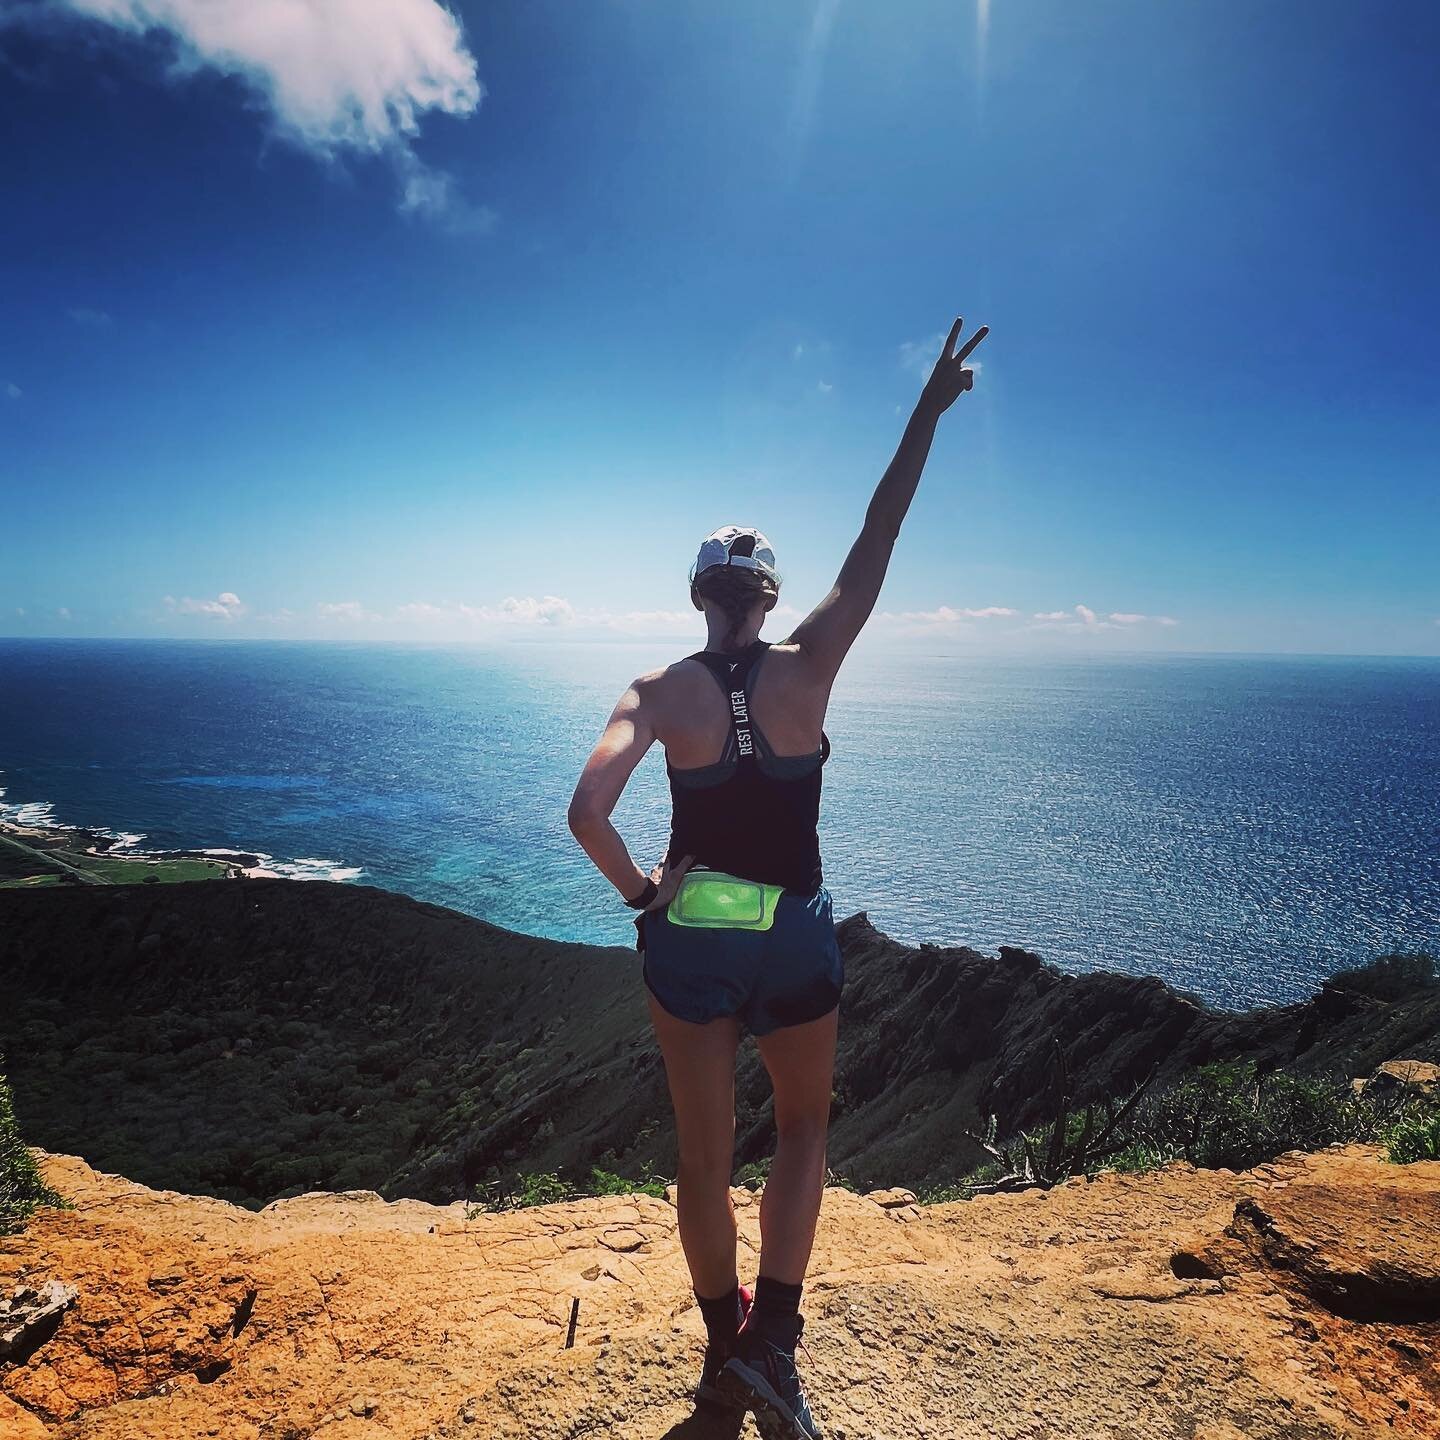 1,048 Steps 
Koko Head Crater, Honolulu Hawaii🌈
This hike was amazing for so many reasons. 🌋🥾🌅
-Biophilia, immersed in nature
-Movement, sweating it out 
-Pilgrimage, so many people all different races, ages, nations, coming together to conquer t